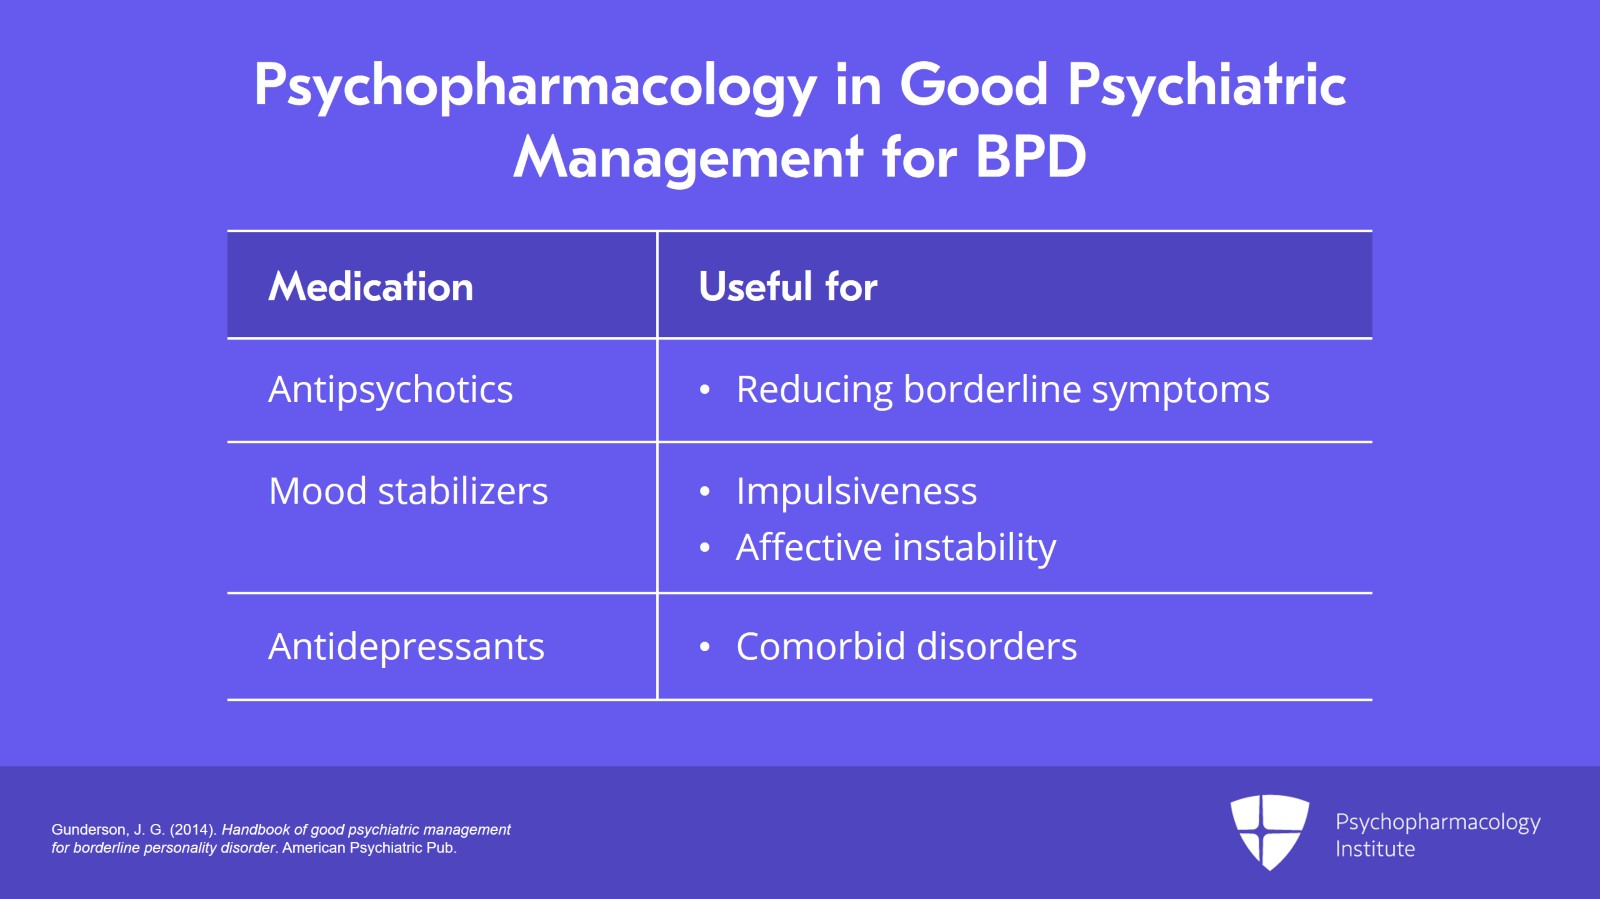 Misconceptions hinder good psychiatric management of BPD - Mayo Clinic